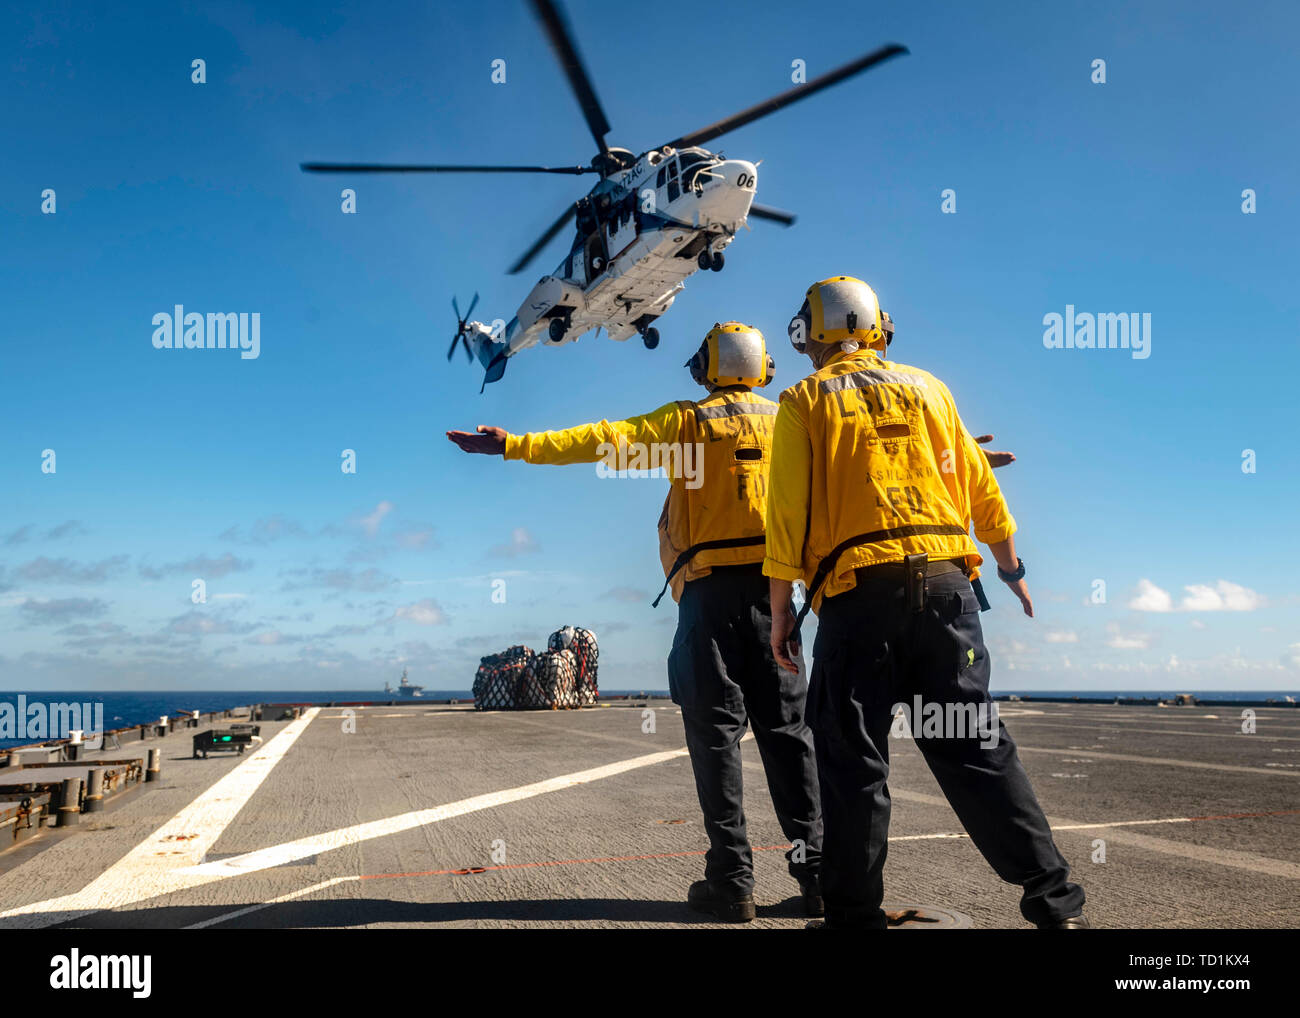 190607-N-WI365-1236 PHILIPPINE SEA (June 07, 2019) – Sailors aboard the amphibious dock landing ship USS Ashland (LSD 48) receive supplies via vertical replenishment (VERTREP) during a replenishment-at-sea (RAS) with the dry cargo and ammunition ship USNS Amelia Earhart (T-AKE-6). Ashland is underway conducting routine operations as part of the Wasp Amphibious Ready Group (ARG) in the U.S. 7th Fleet area of operations. (U.S. Navy photo by Mass Communication Specialist 2nd Class Markus Castaneda) Stock Photo